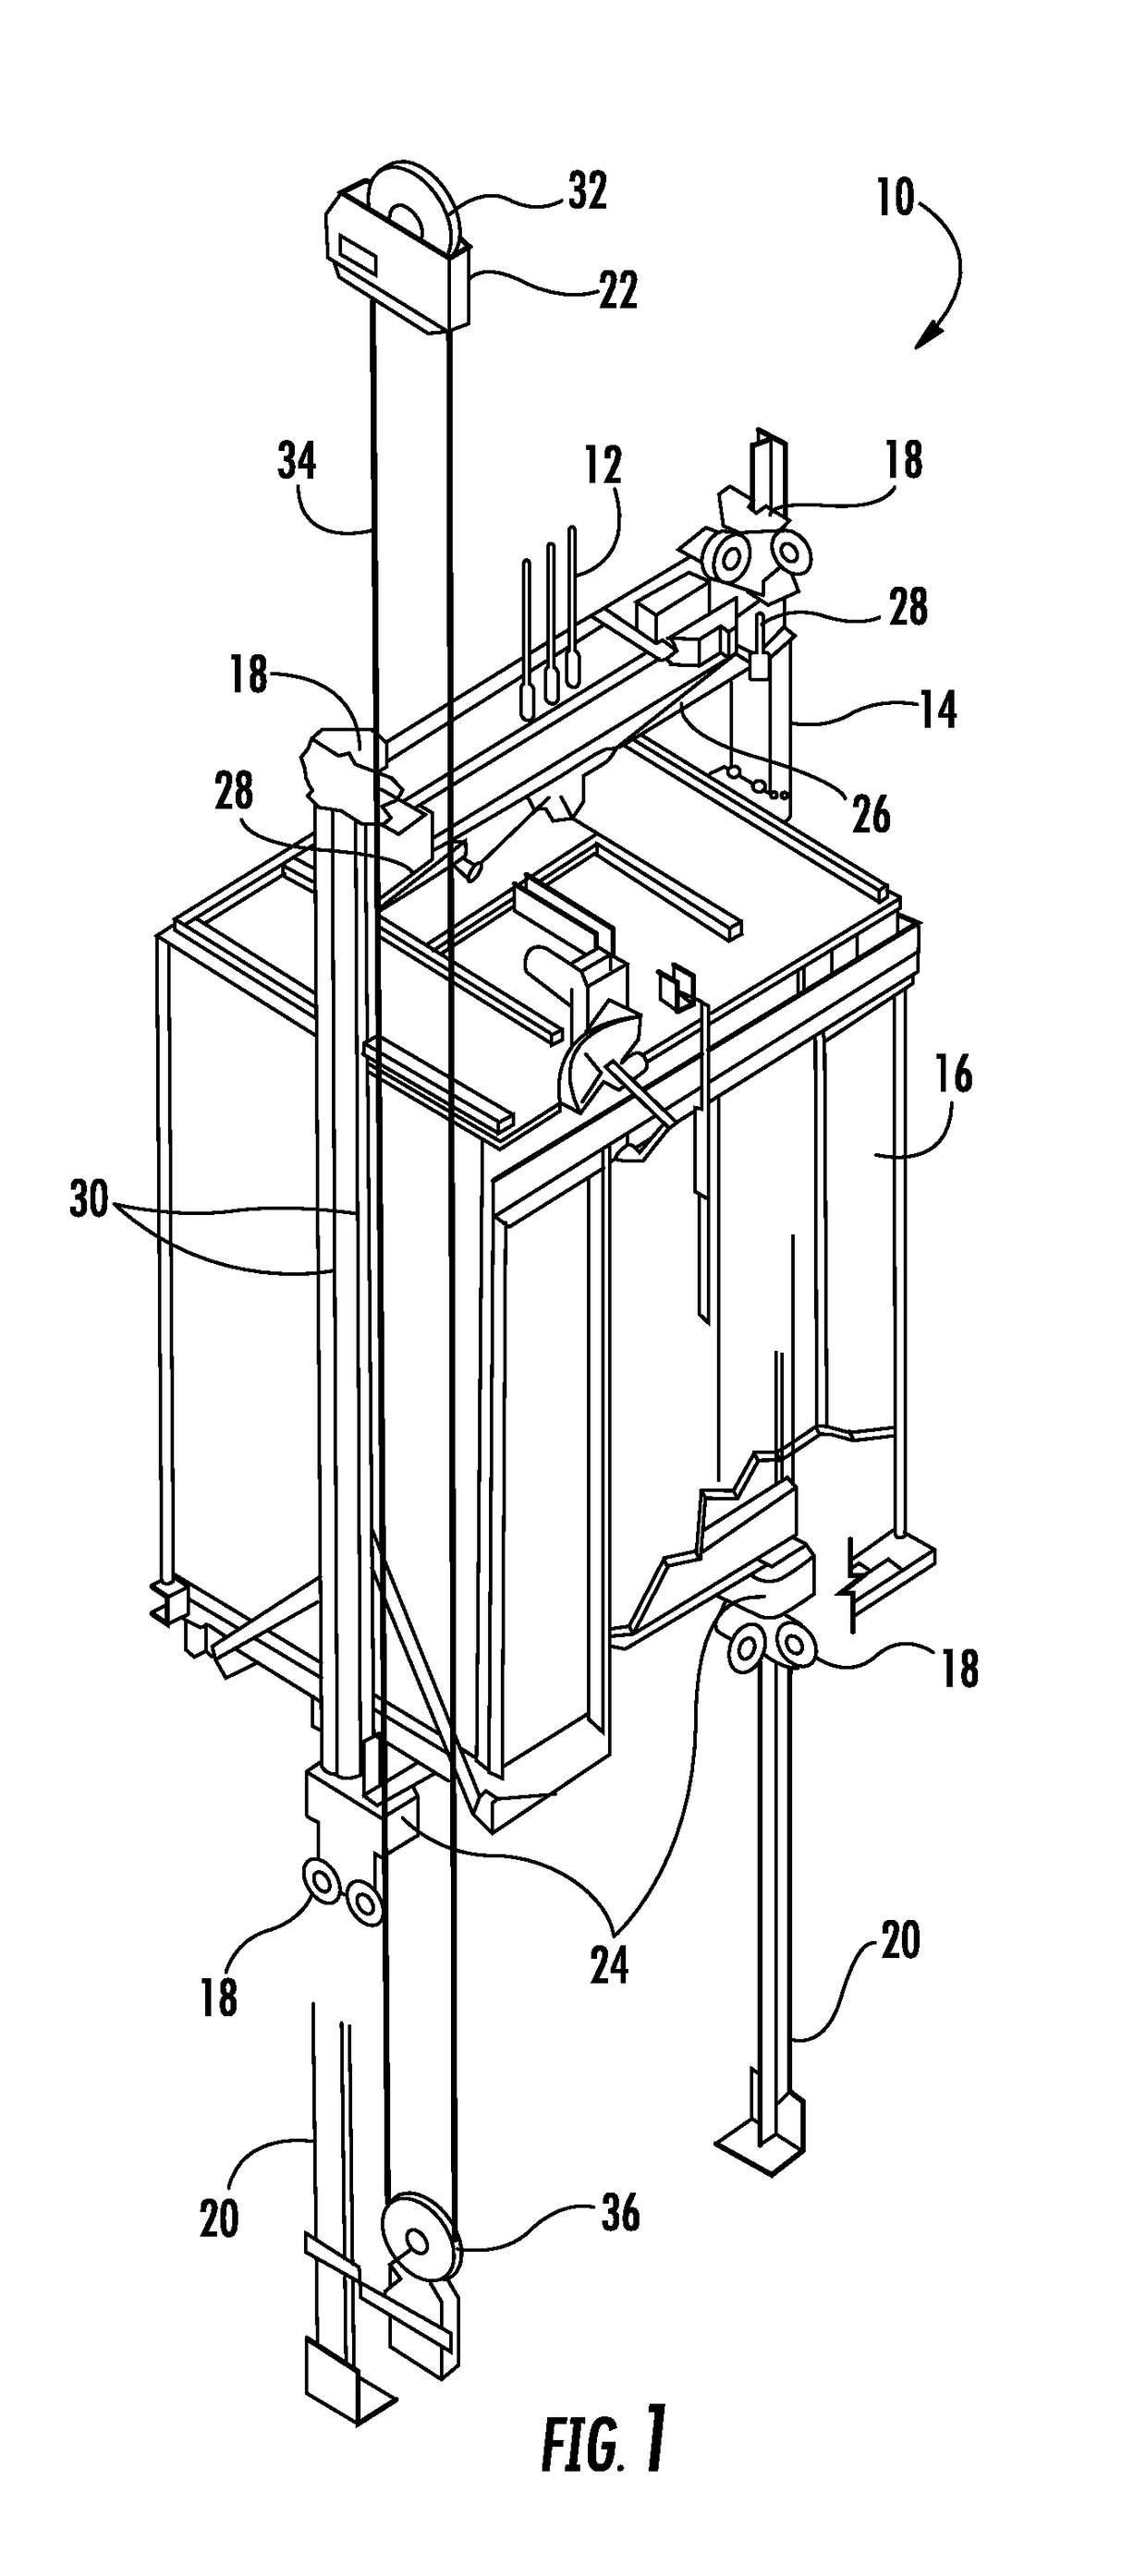 Electronic safety actuator